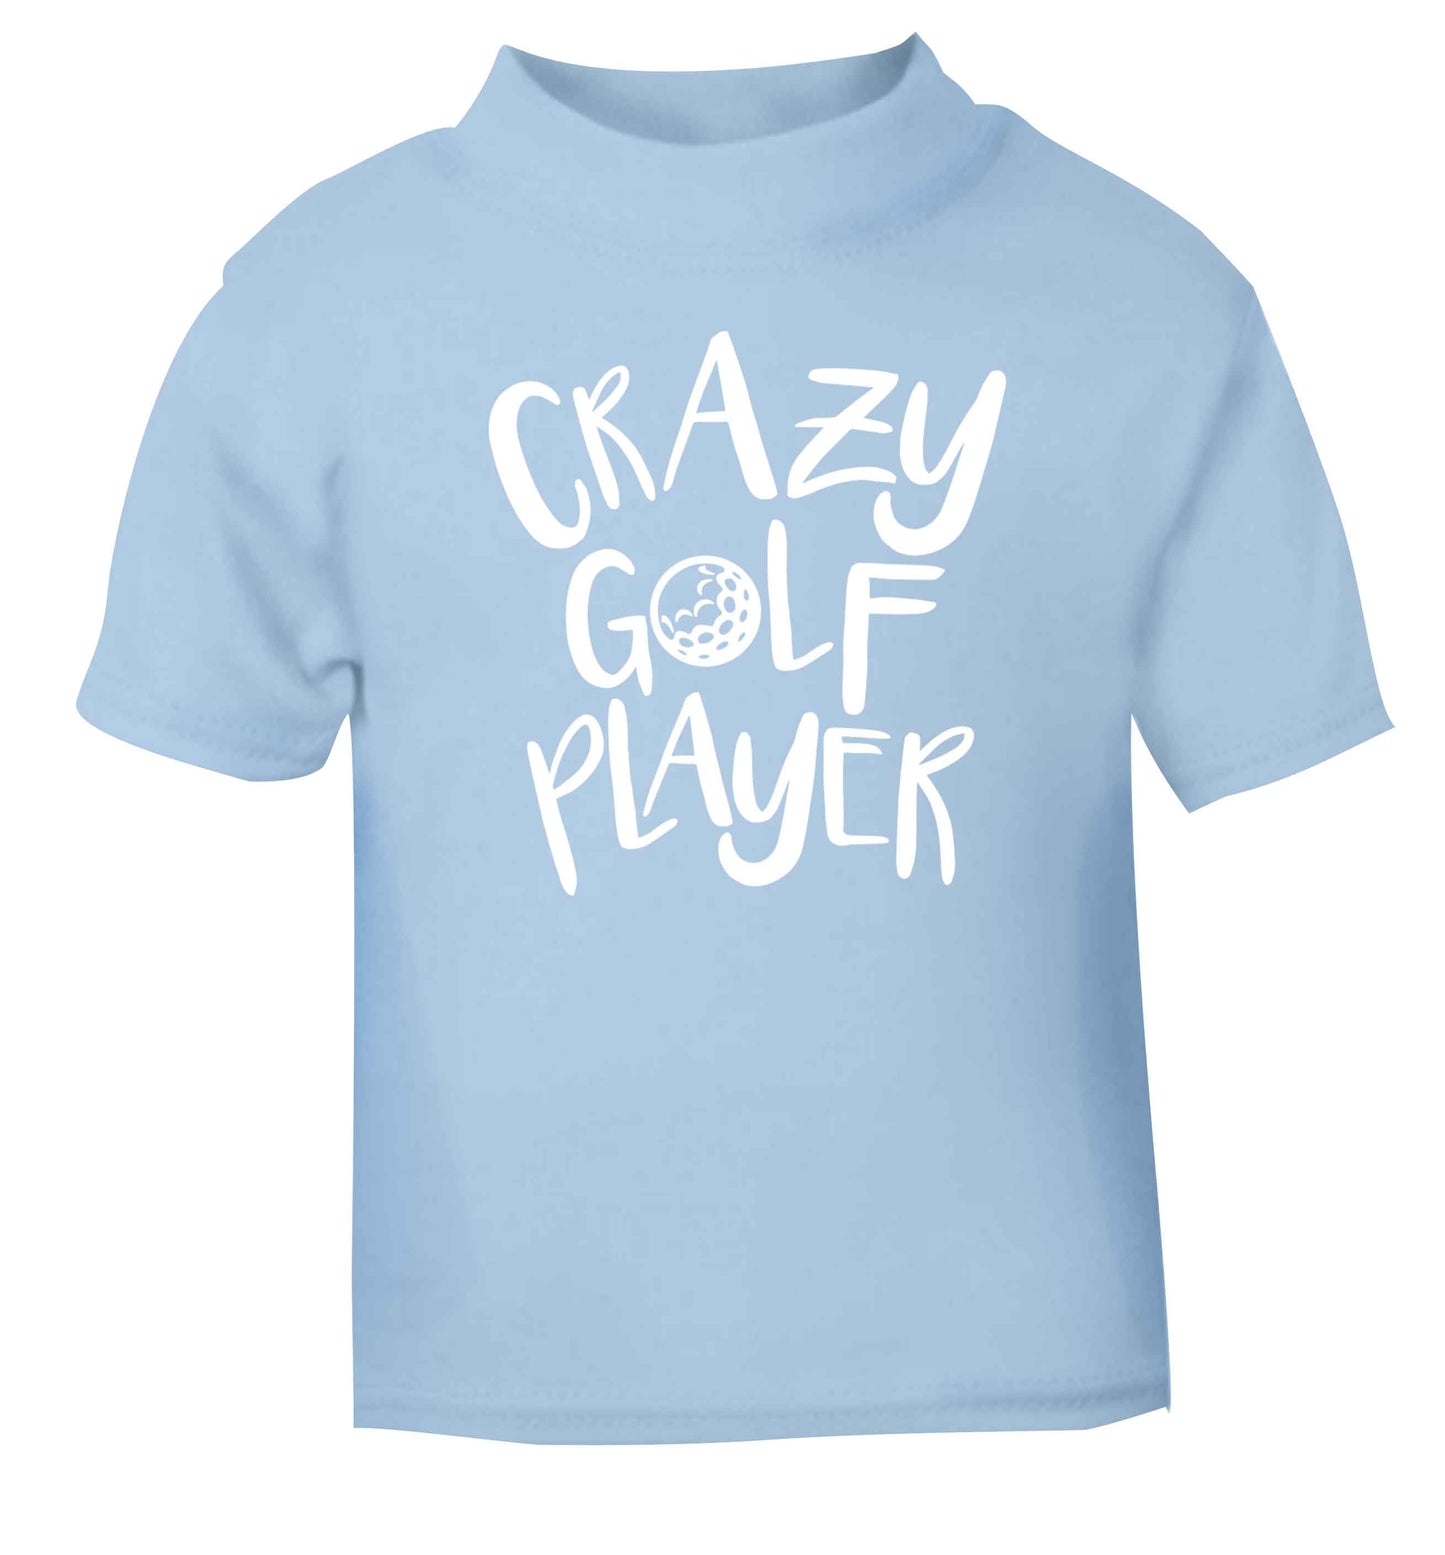 Crazy golf player light blue Baby Toddler Tshirt 2 Years